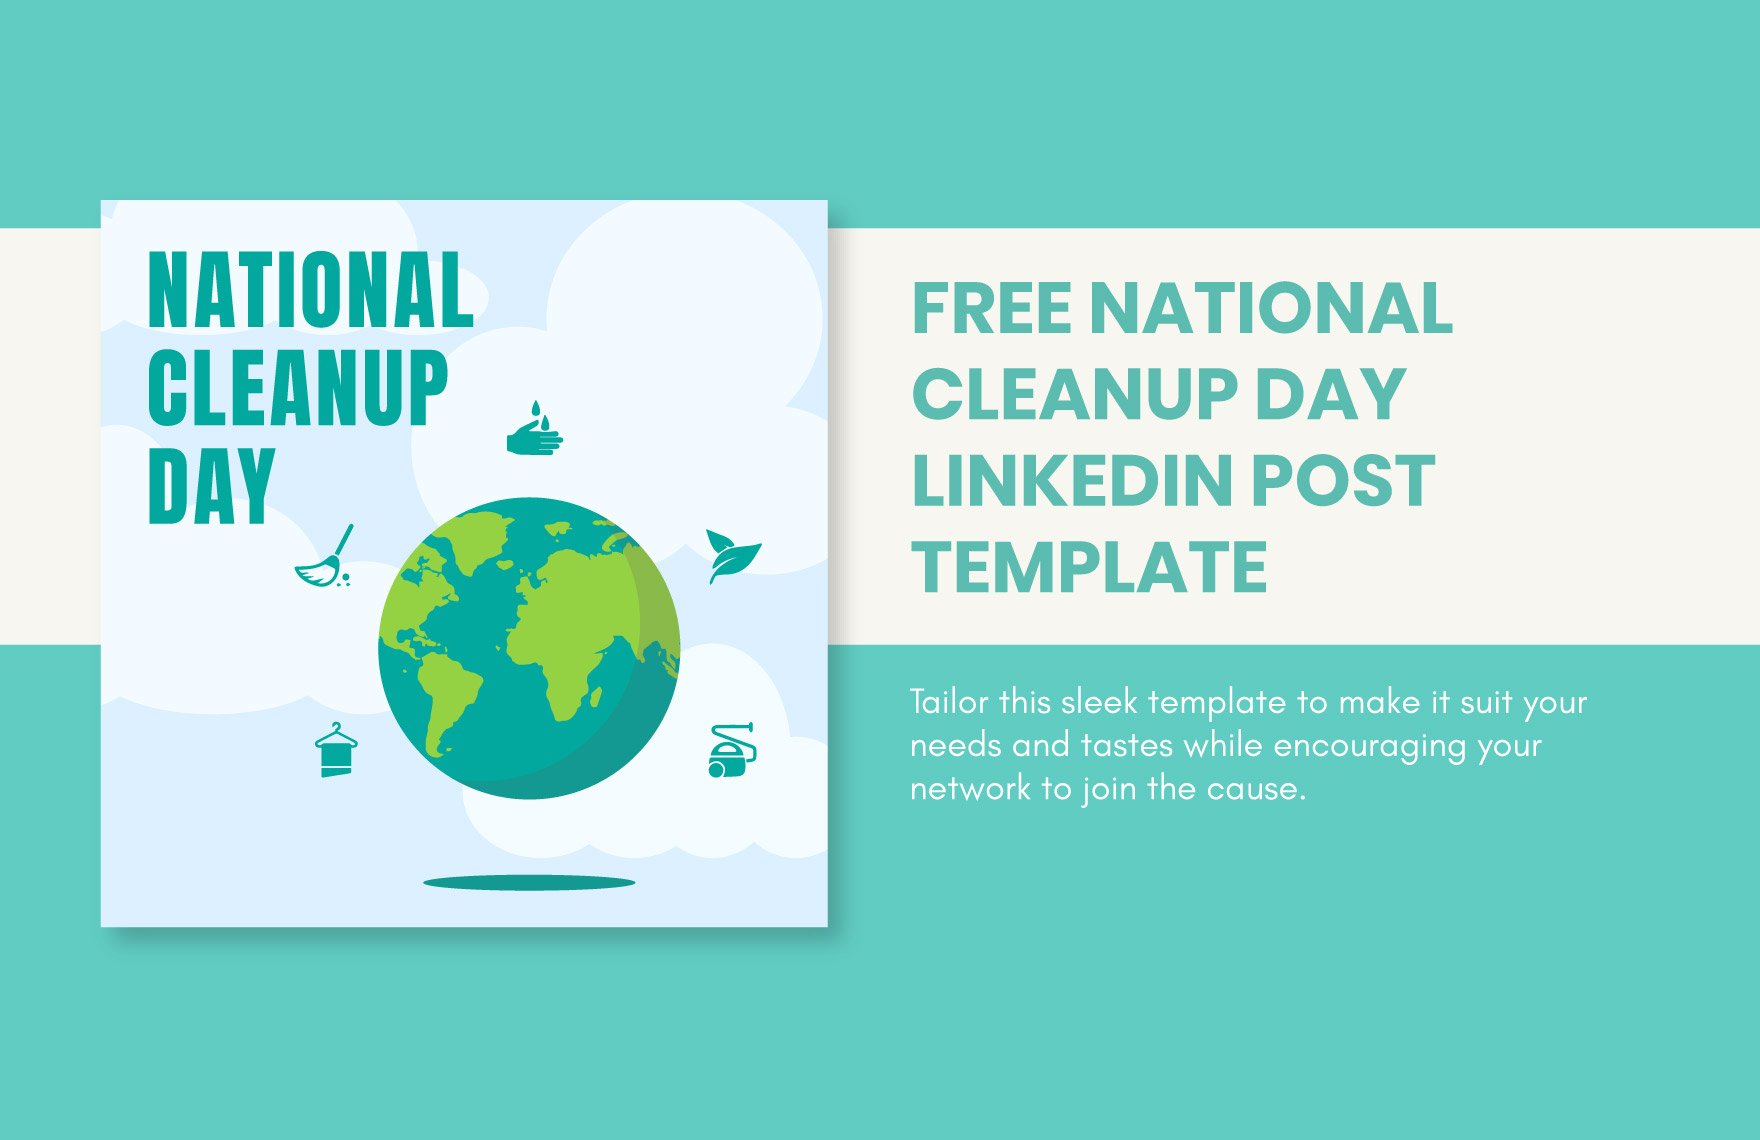 Free National CleanUp Day LinkedIn Post Template in Illustrator, PSD, PNG